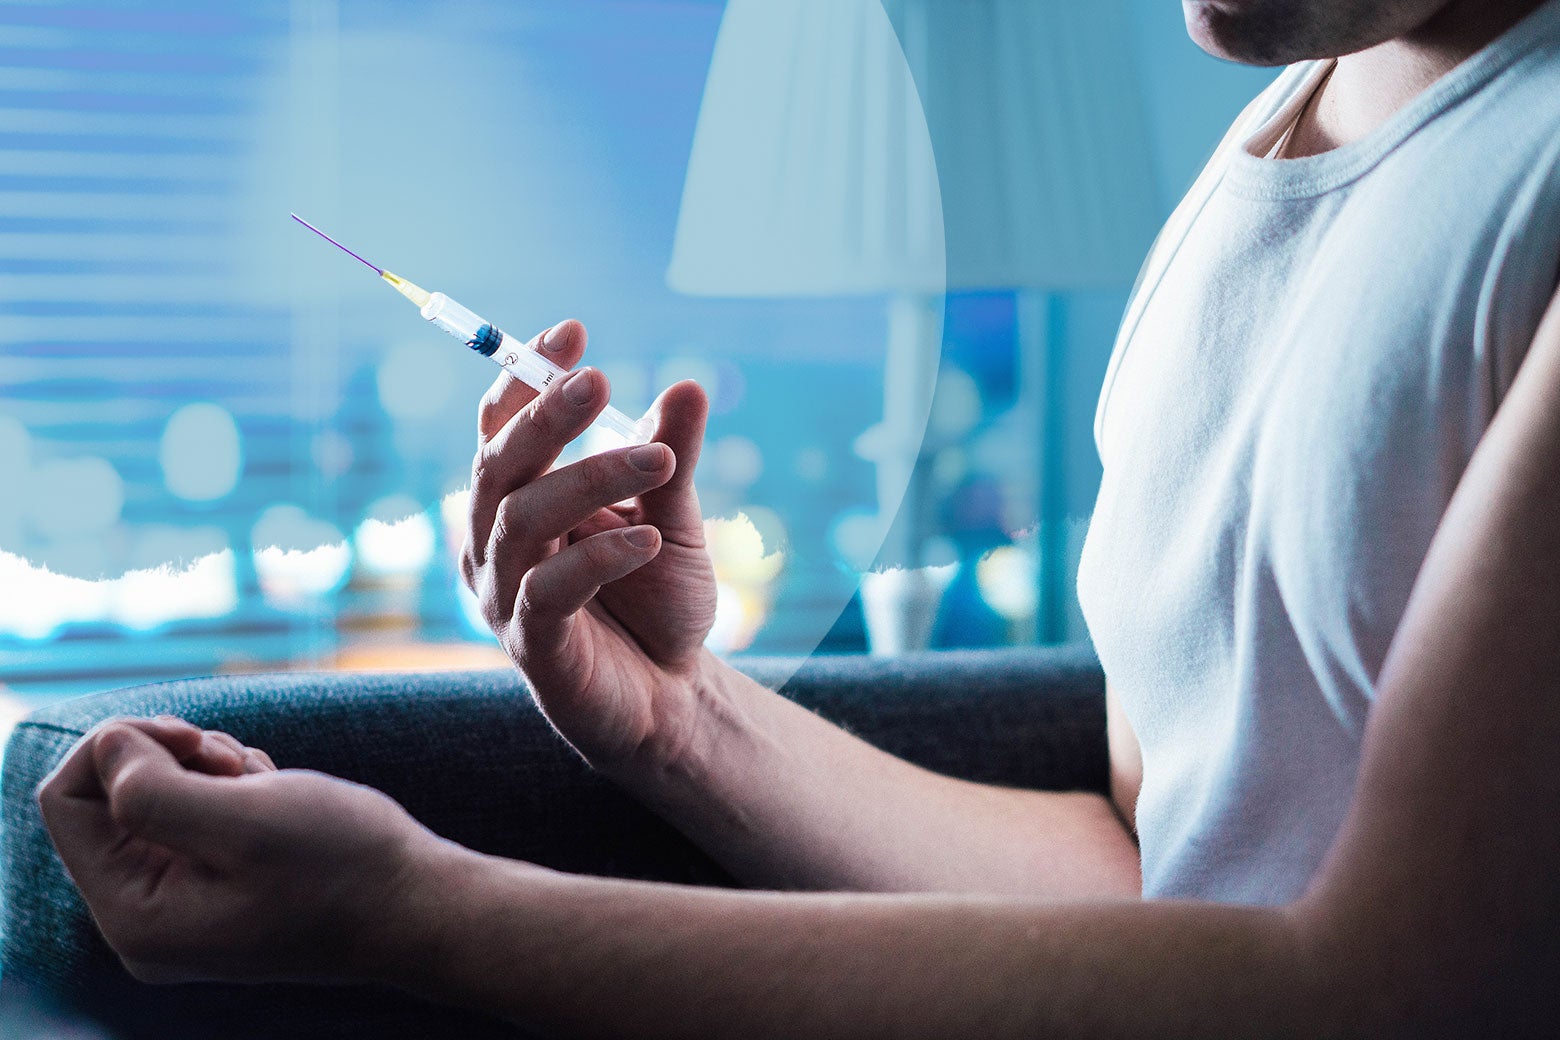 Man about to inject drugs with a syringe. Photo illustration by Slate. Photo by Thinkstock.